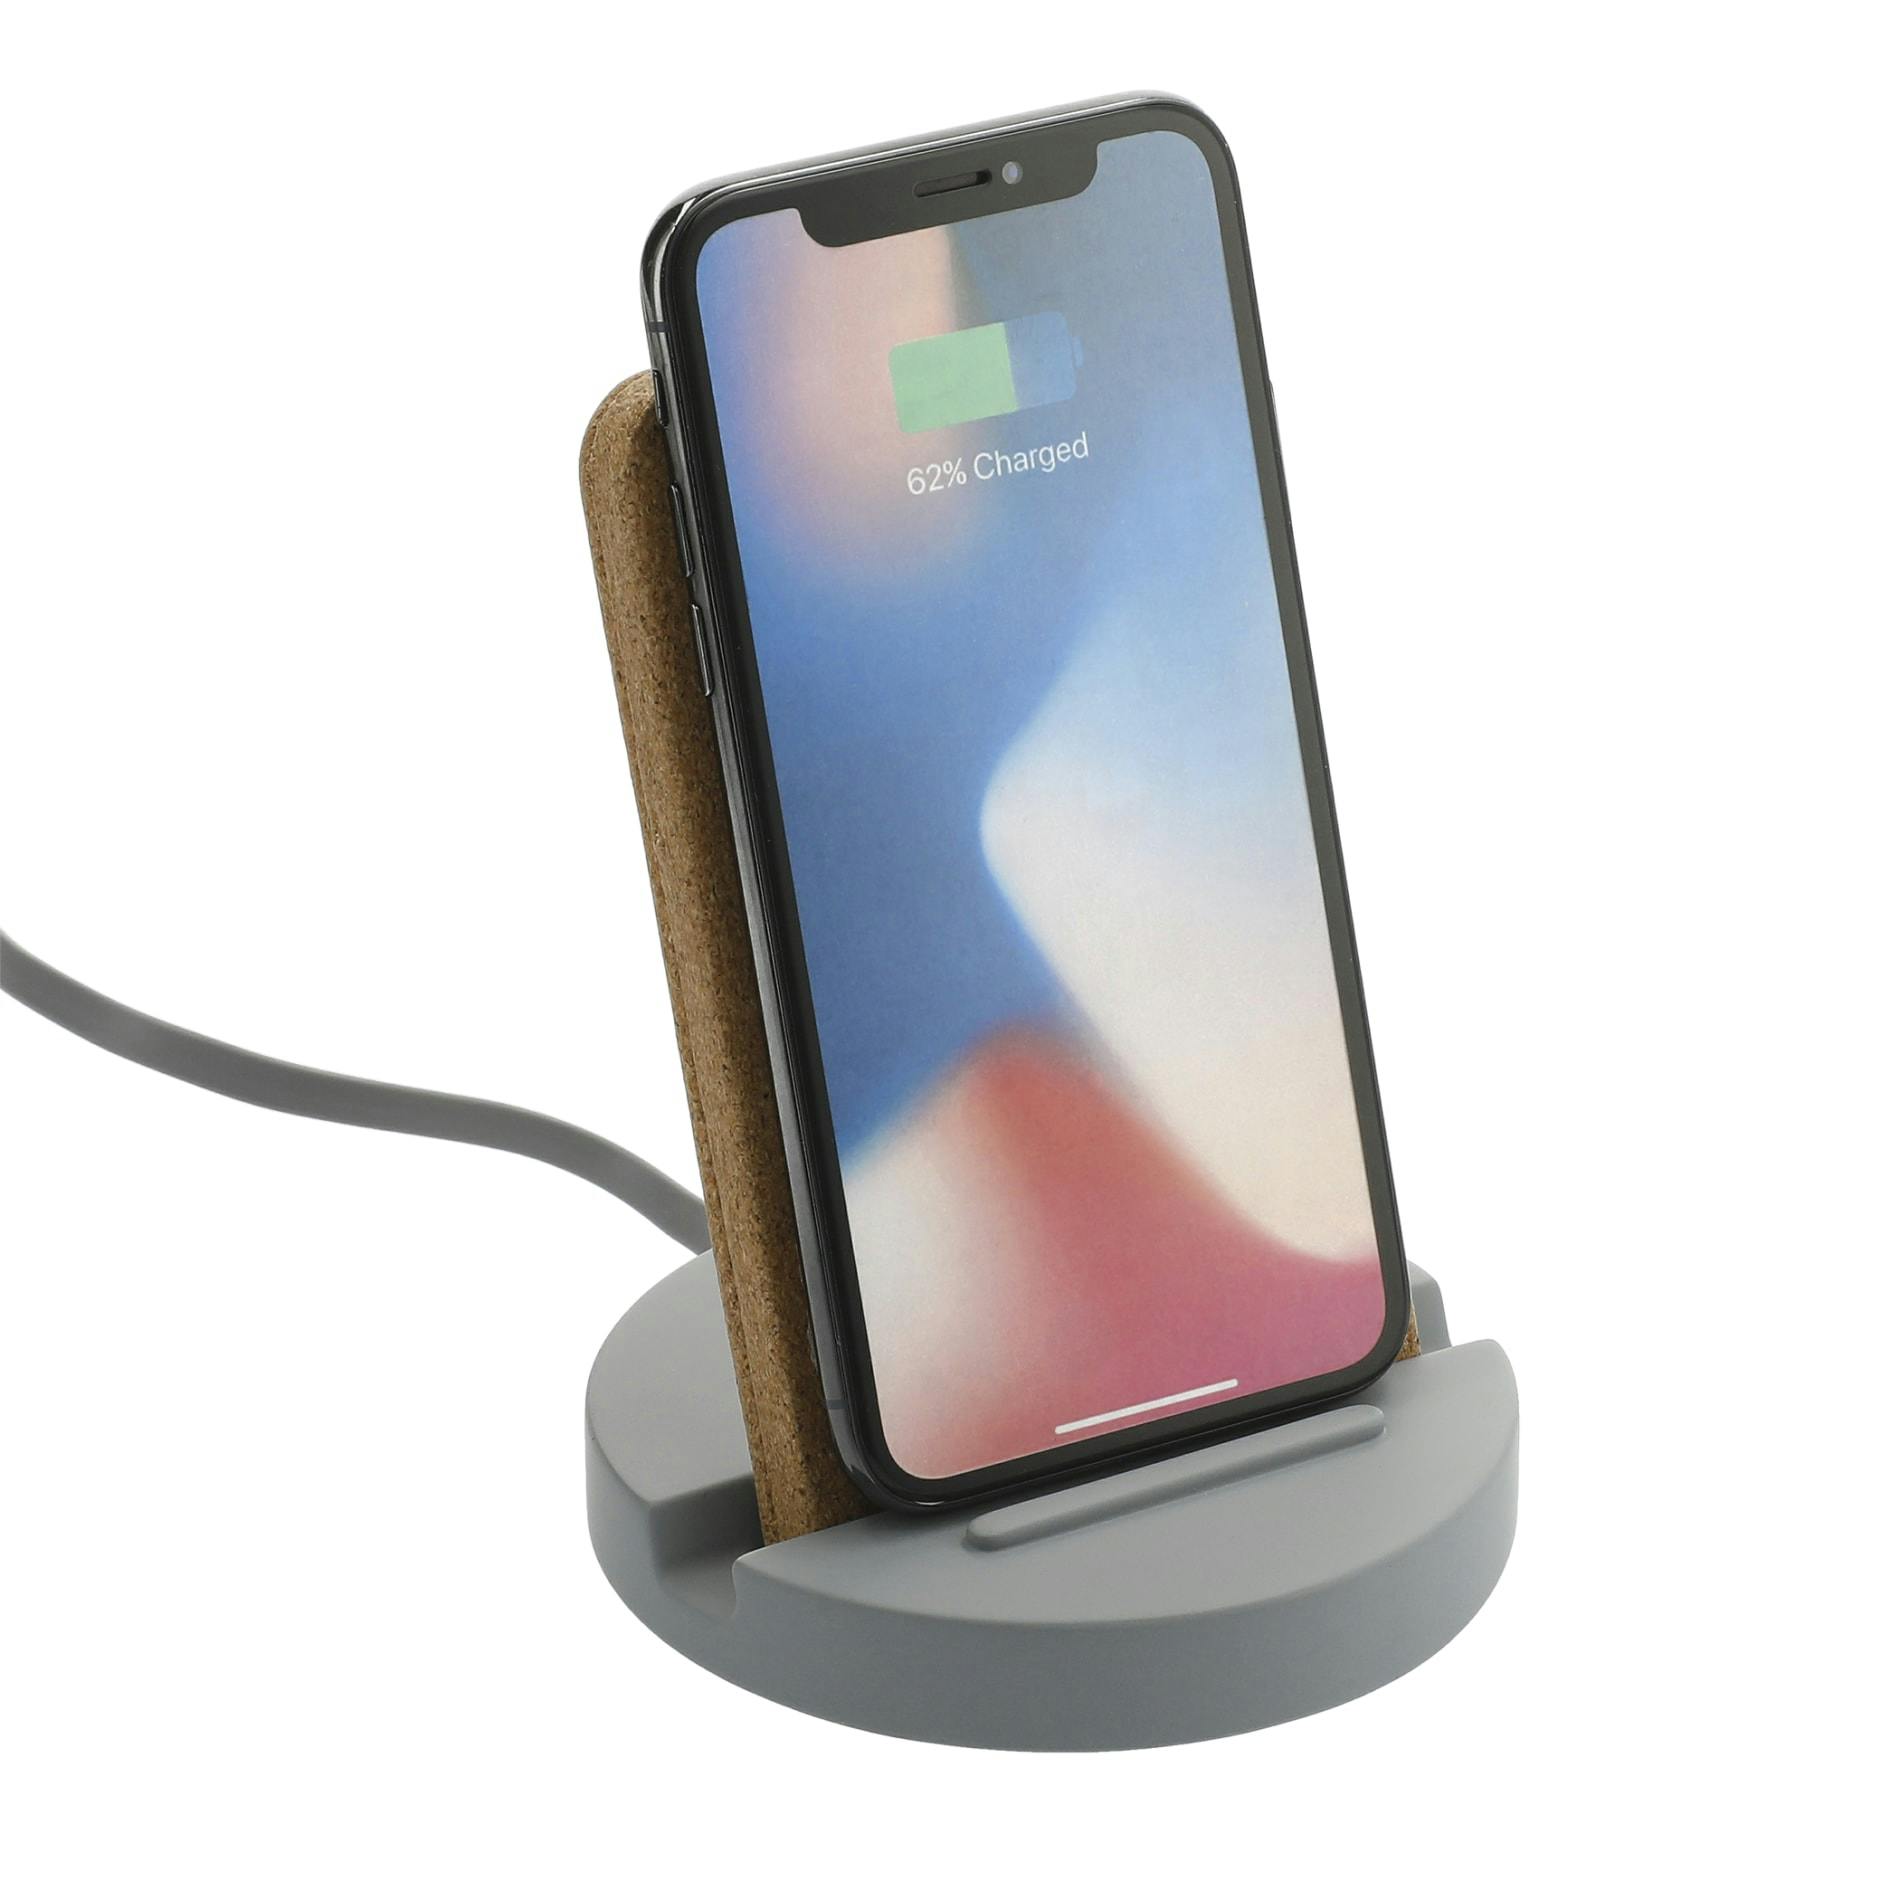 Set in Stone Wireless Charging Stand - additional Image 3